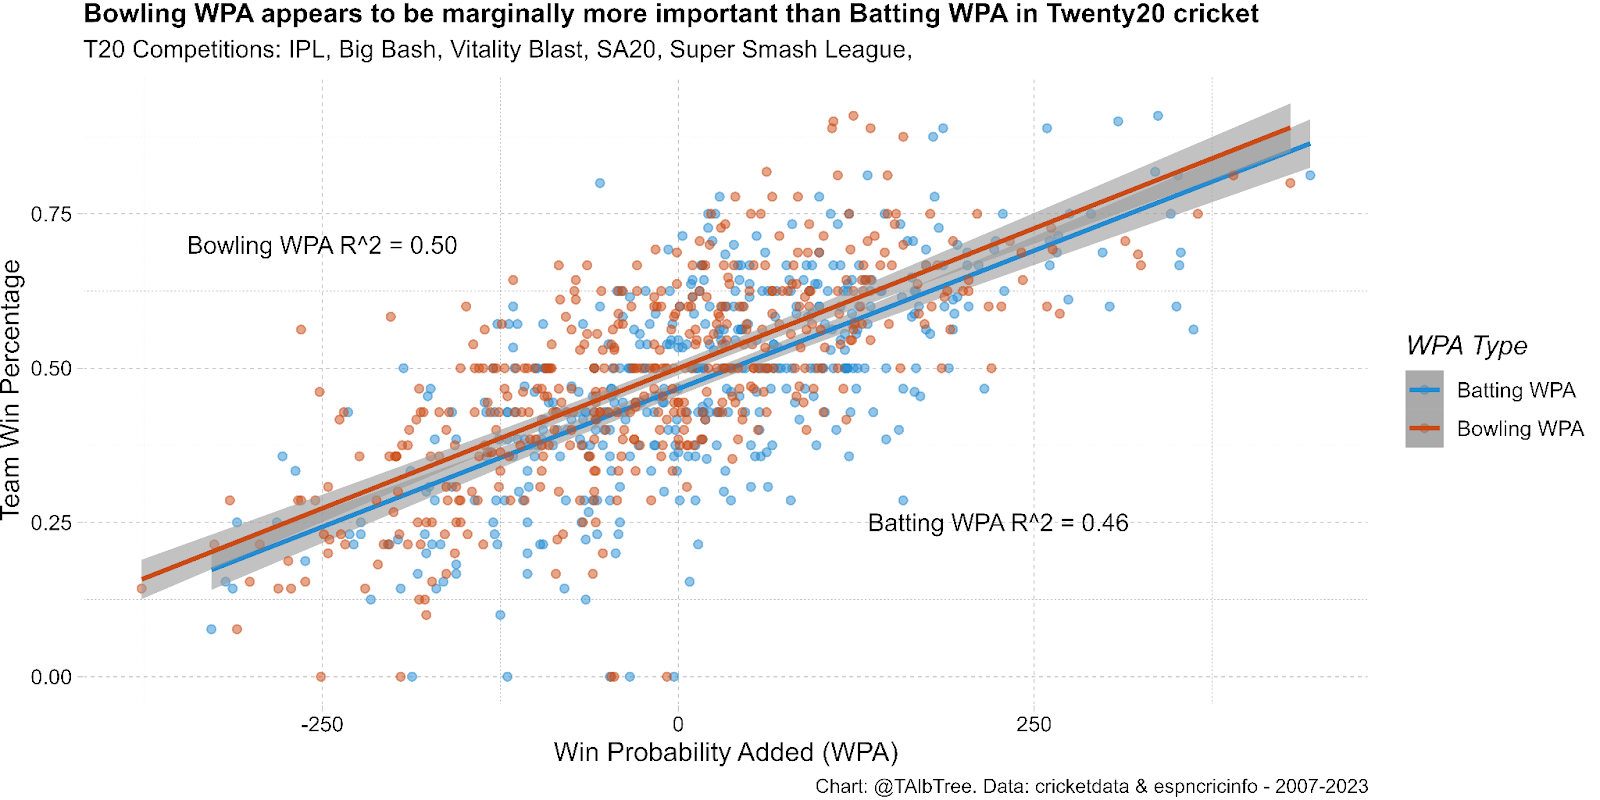 Scatter plot of batting and bowler win probability added vs team win percentage for the five major Twenty20 competitions: Indian Premier League, Big Bash, Vitality Blast, SA20, Super Smash League.